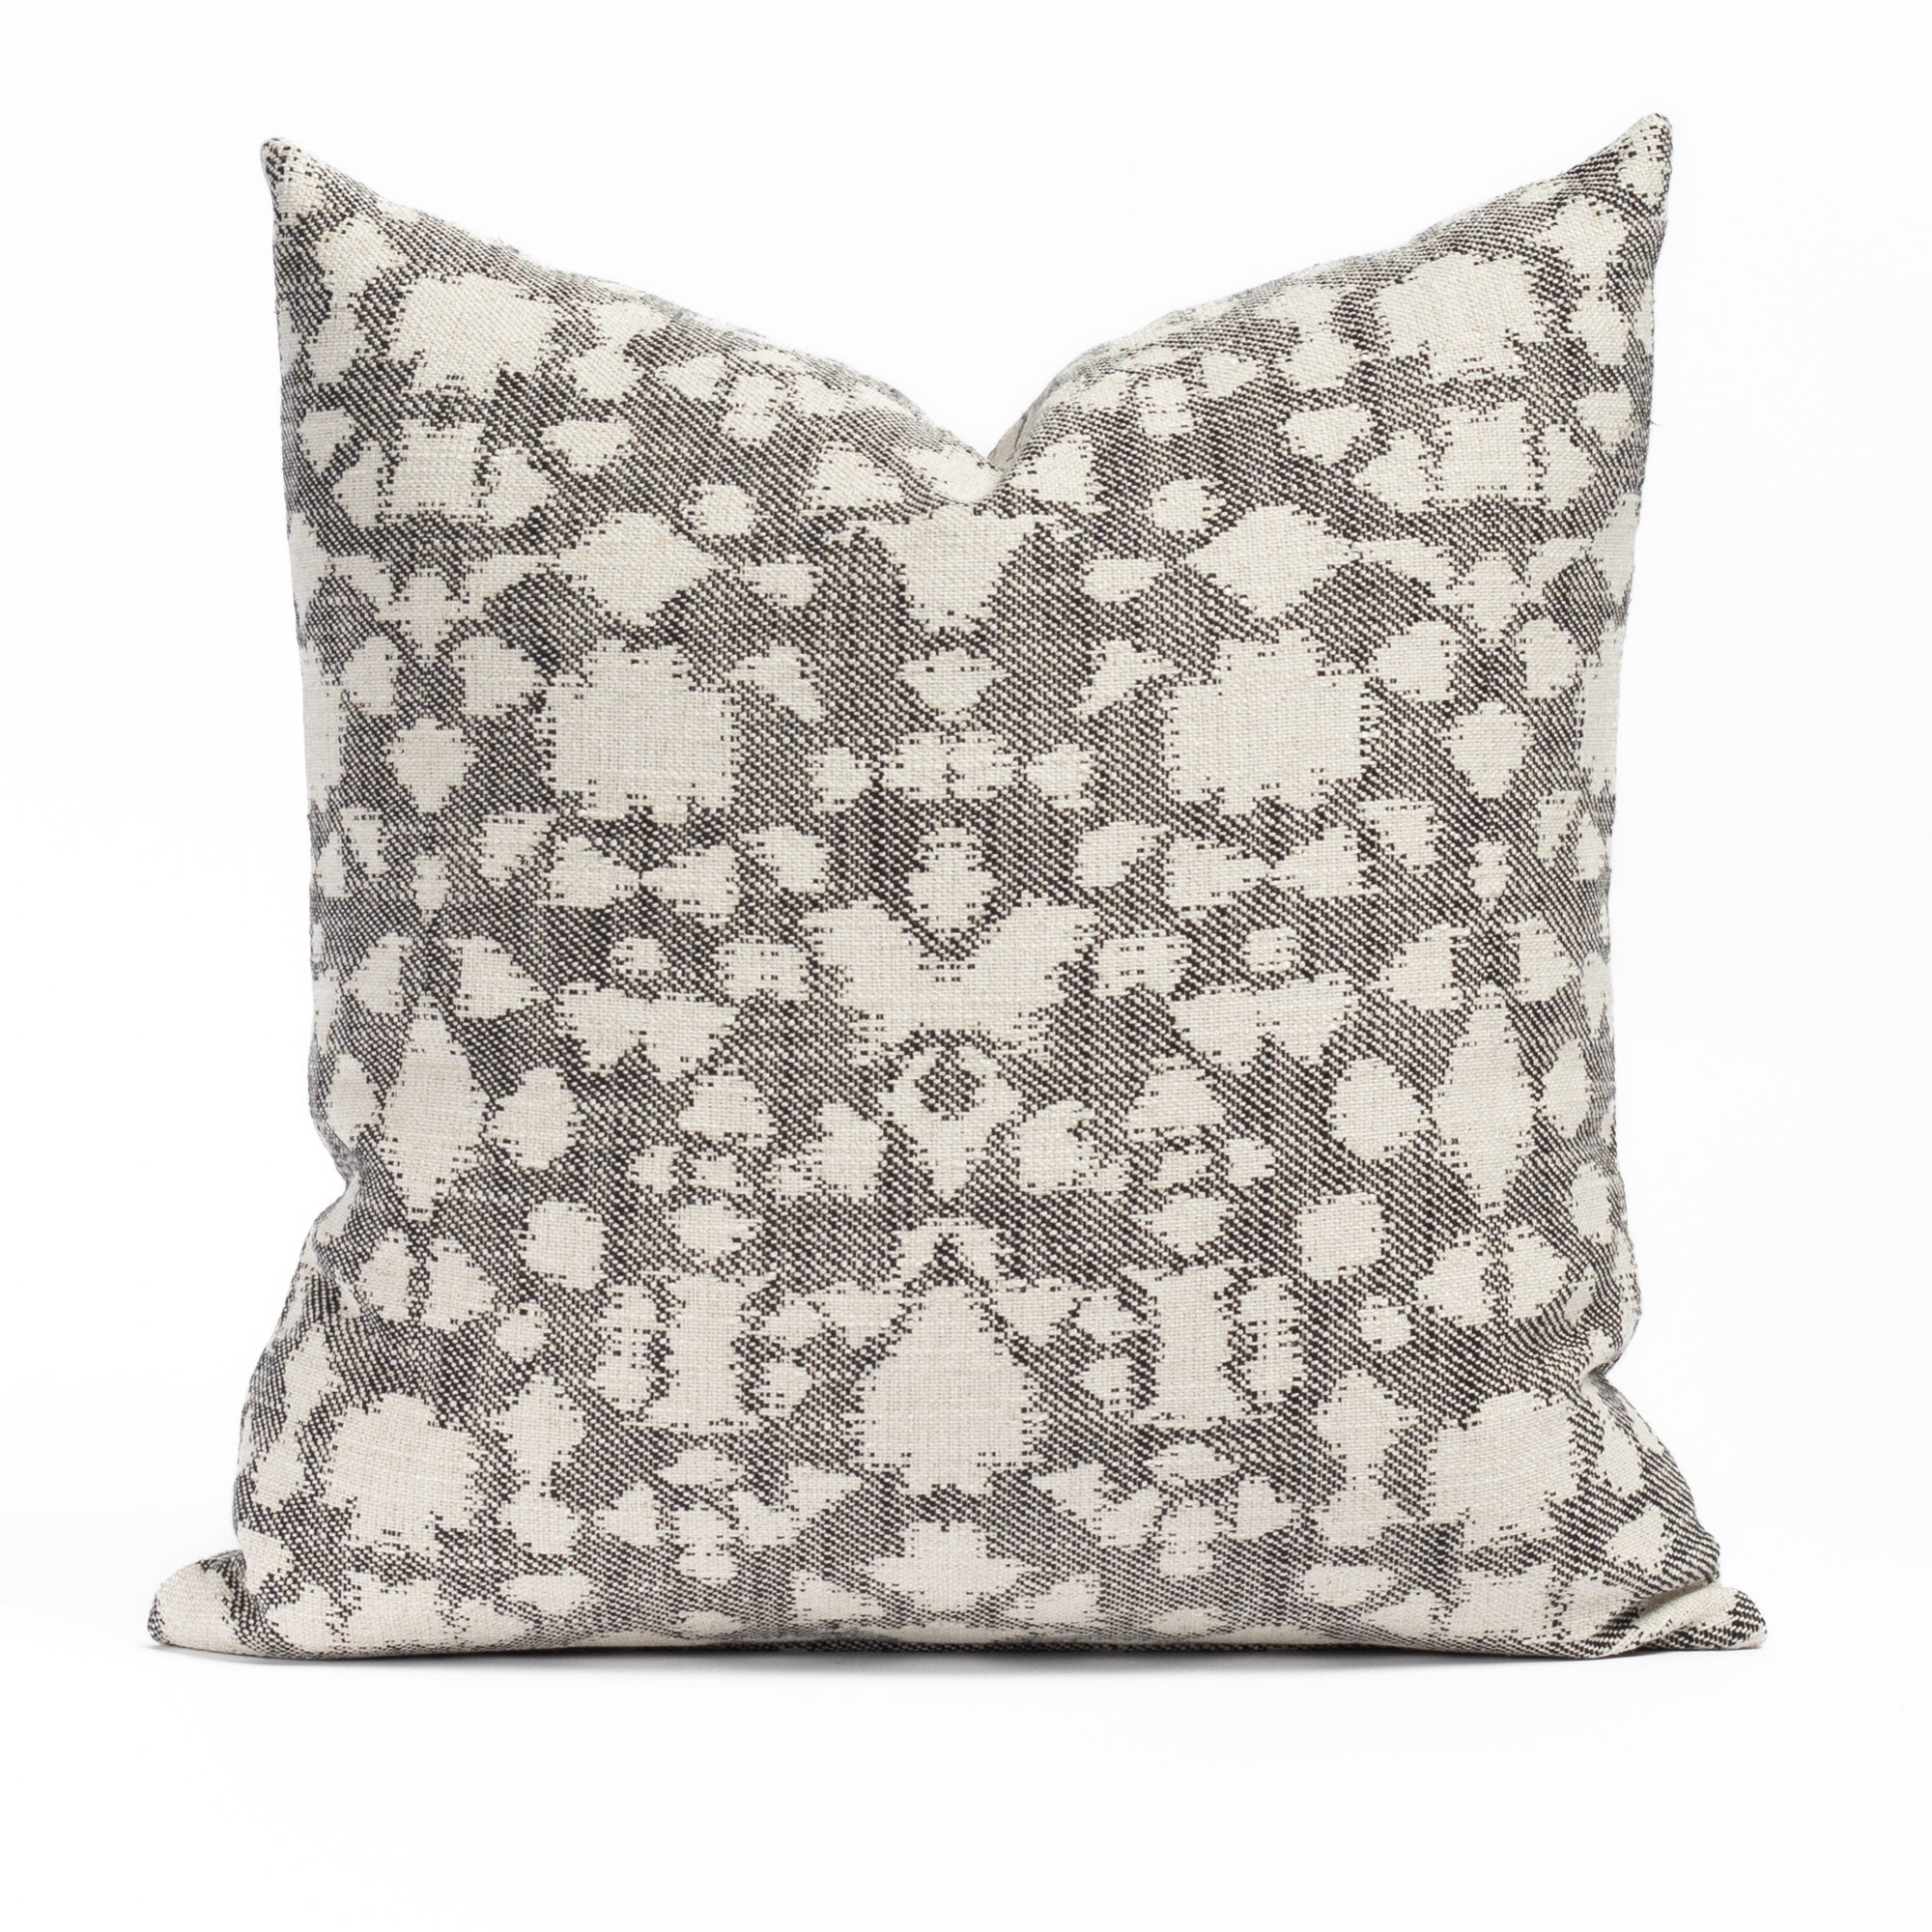 Astrid 20x20 Domino, an abstract botanical patterned throw pillow from Tonic Living